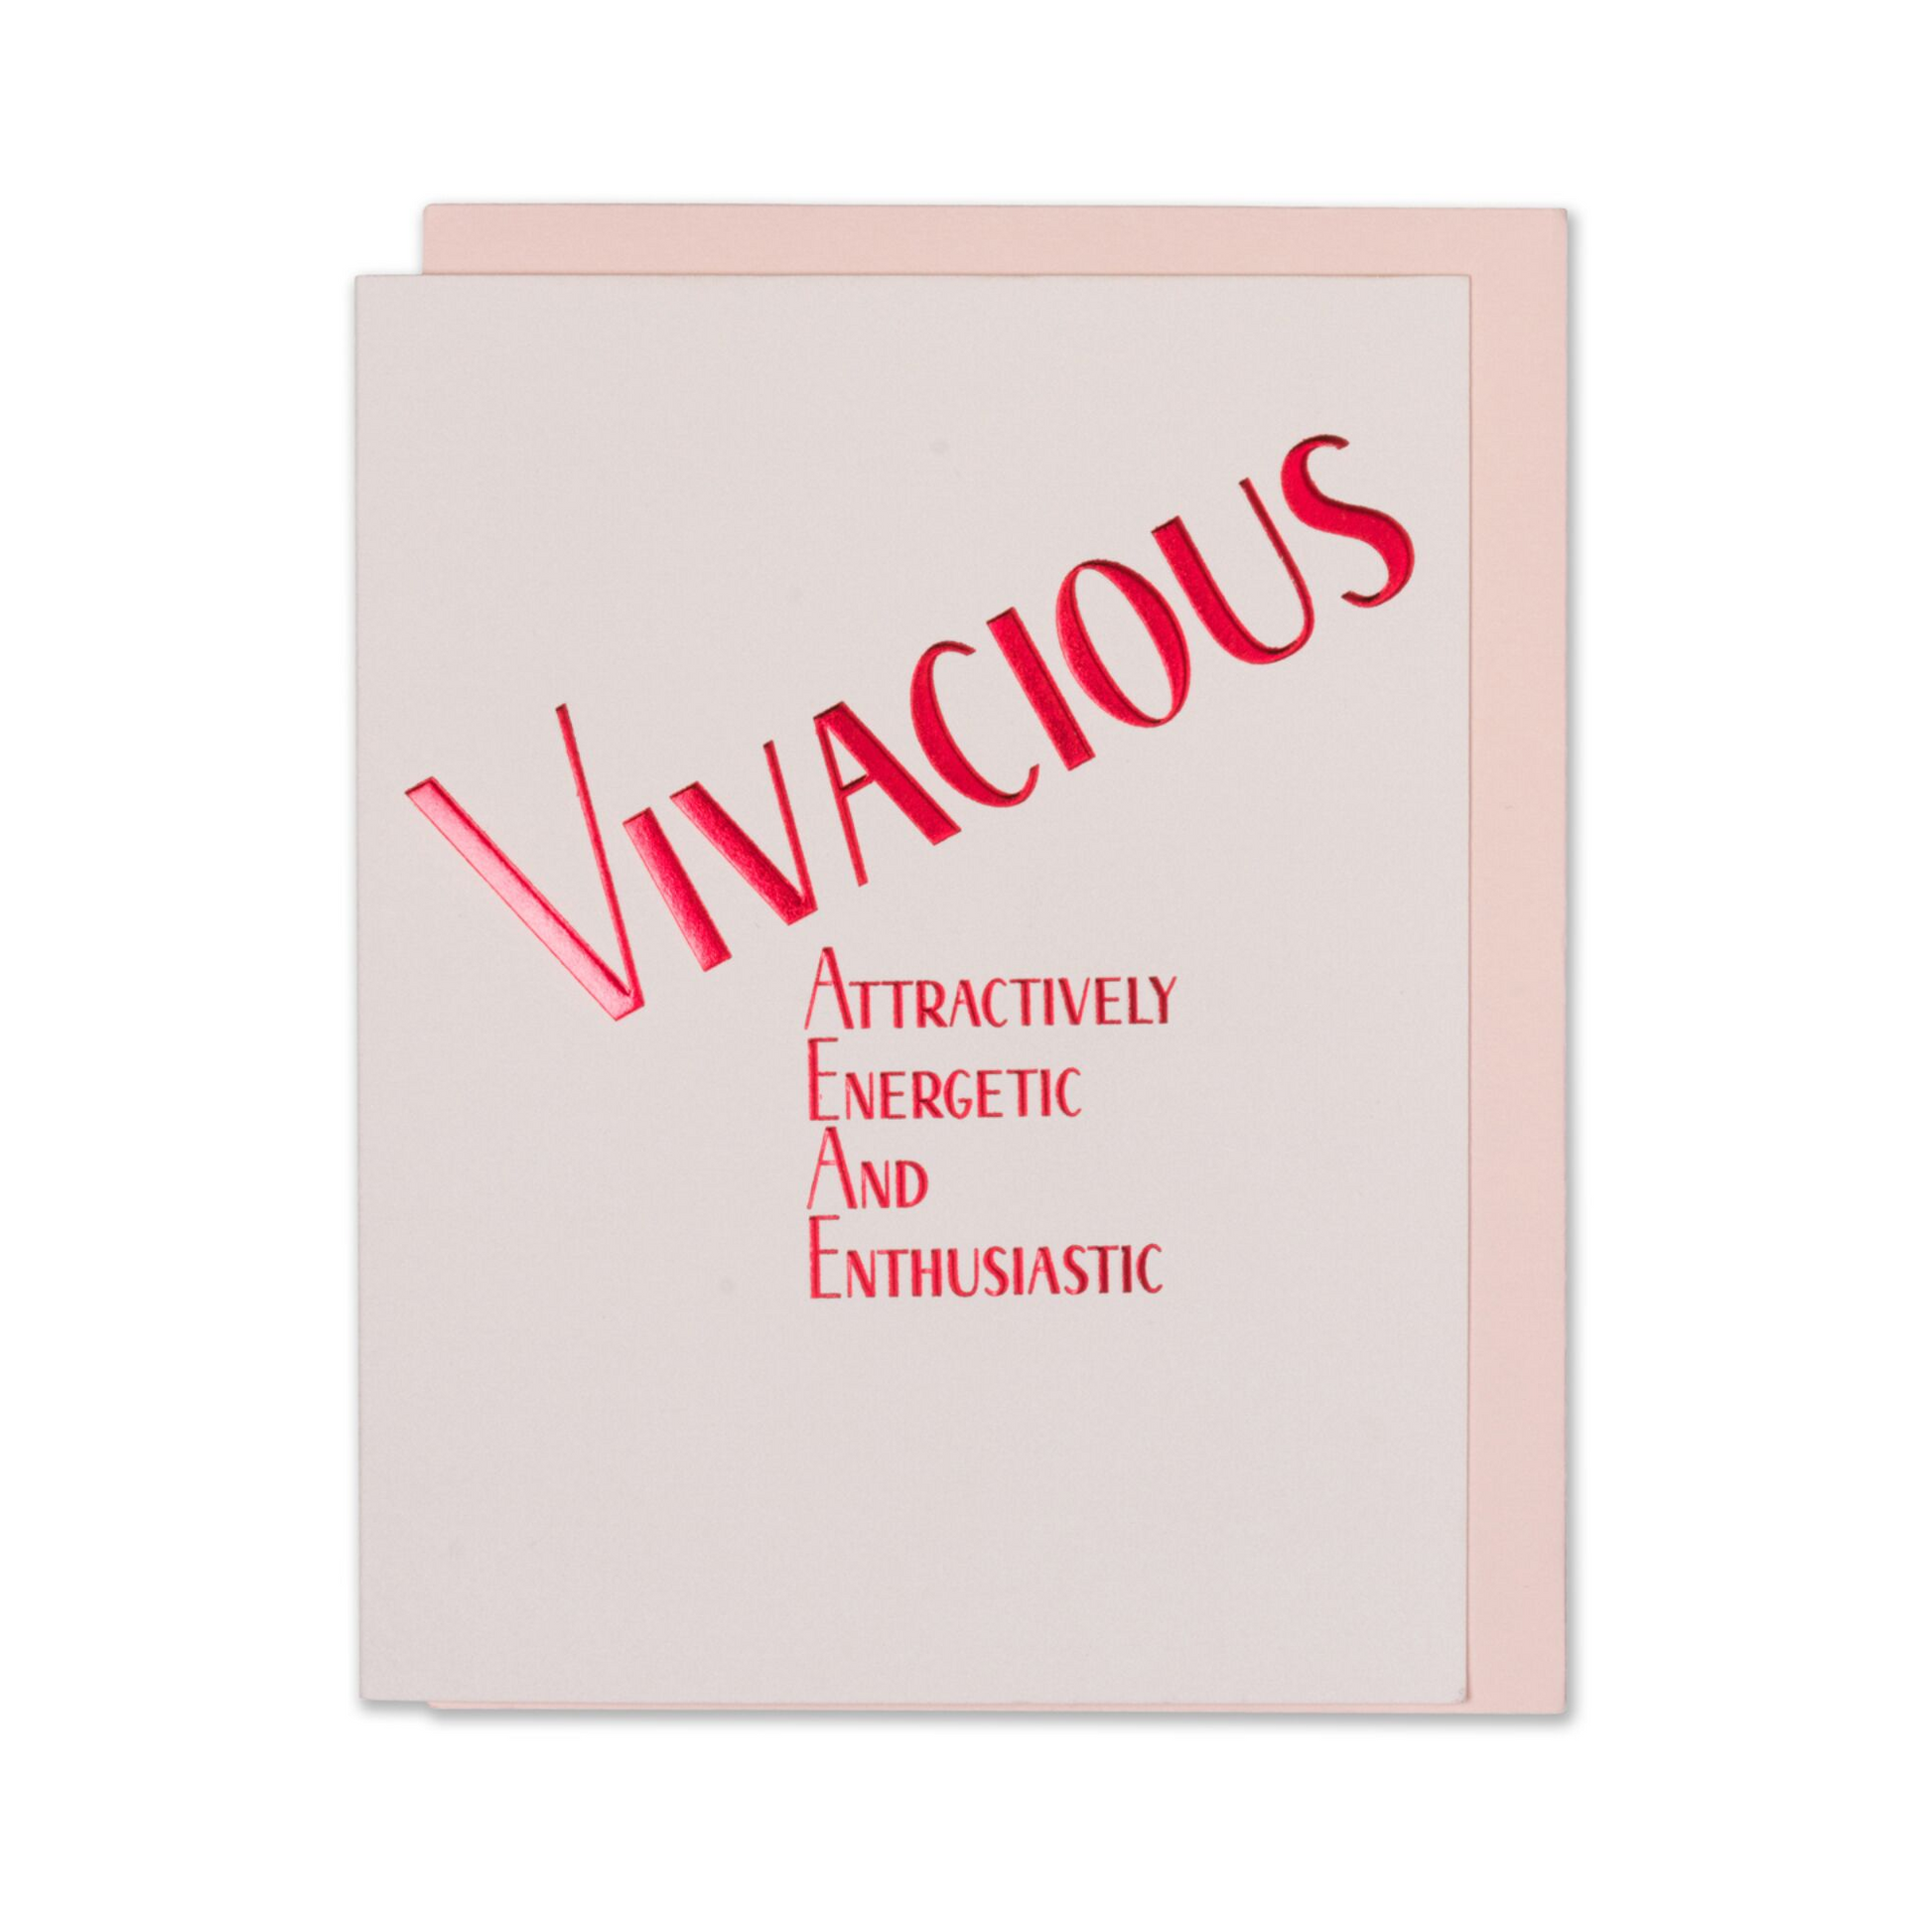 Girlfriend Quote Card - Vivacious - Attractively Energetic And Enthusiastic